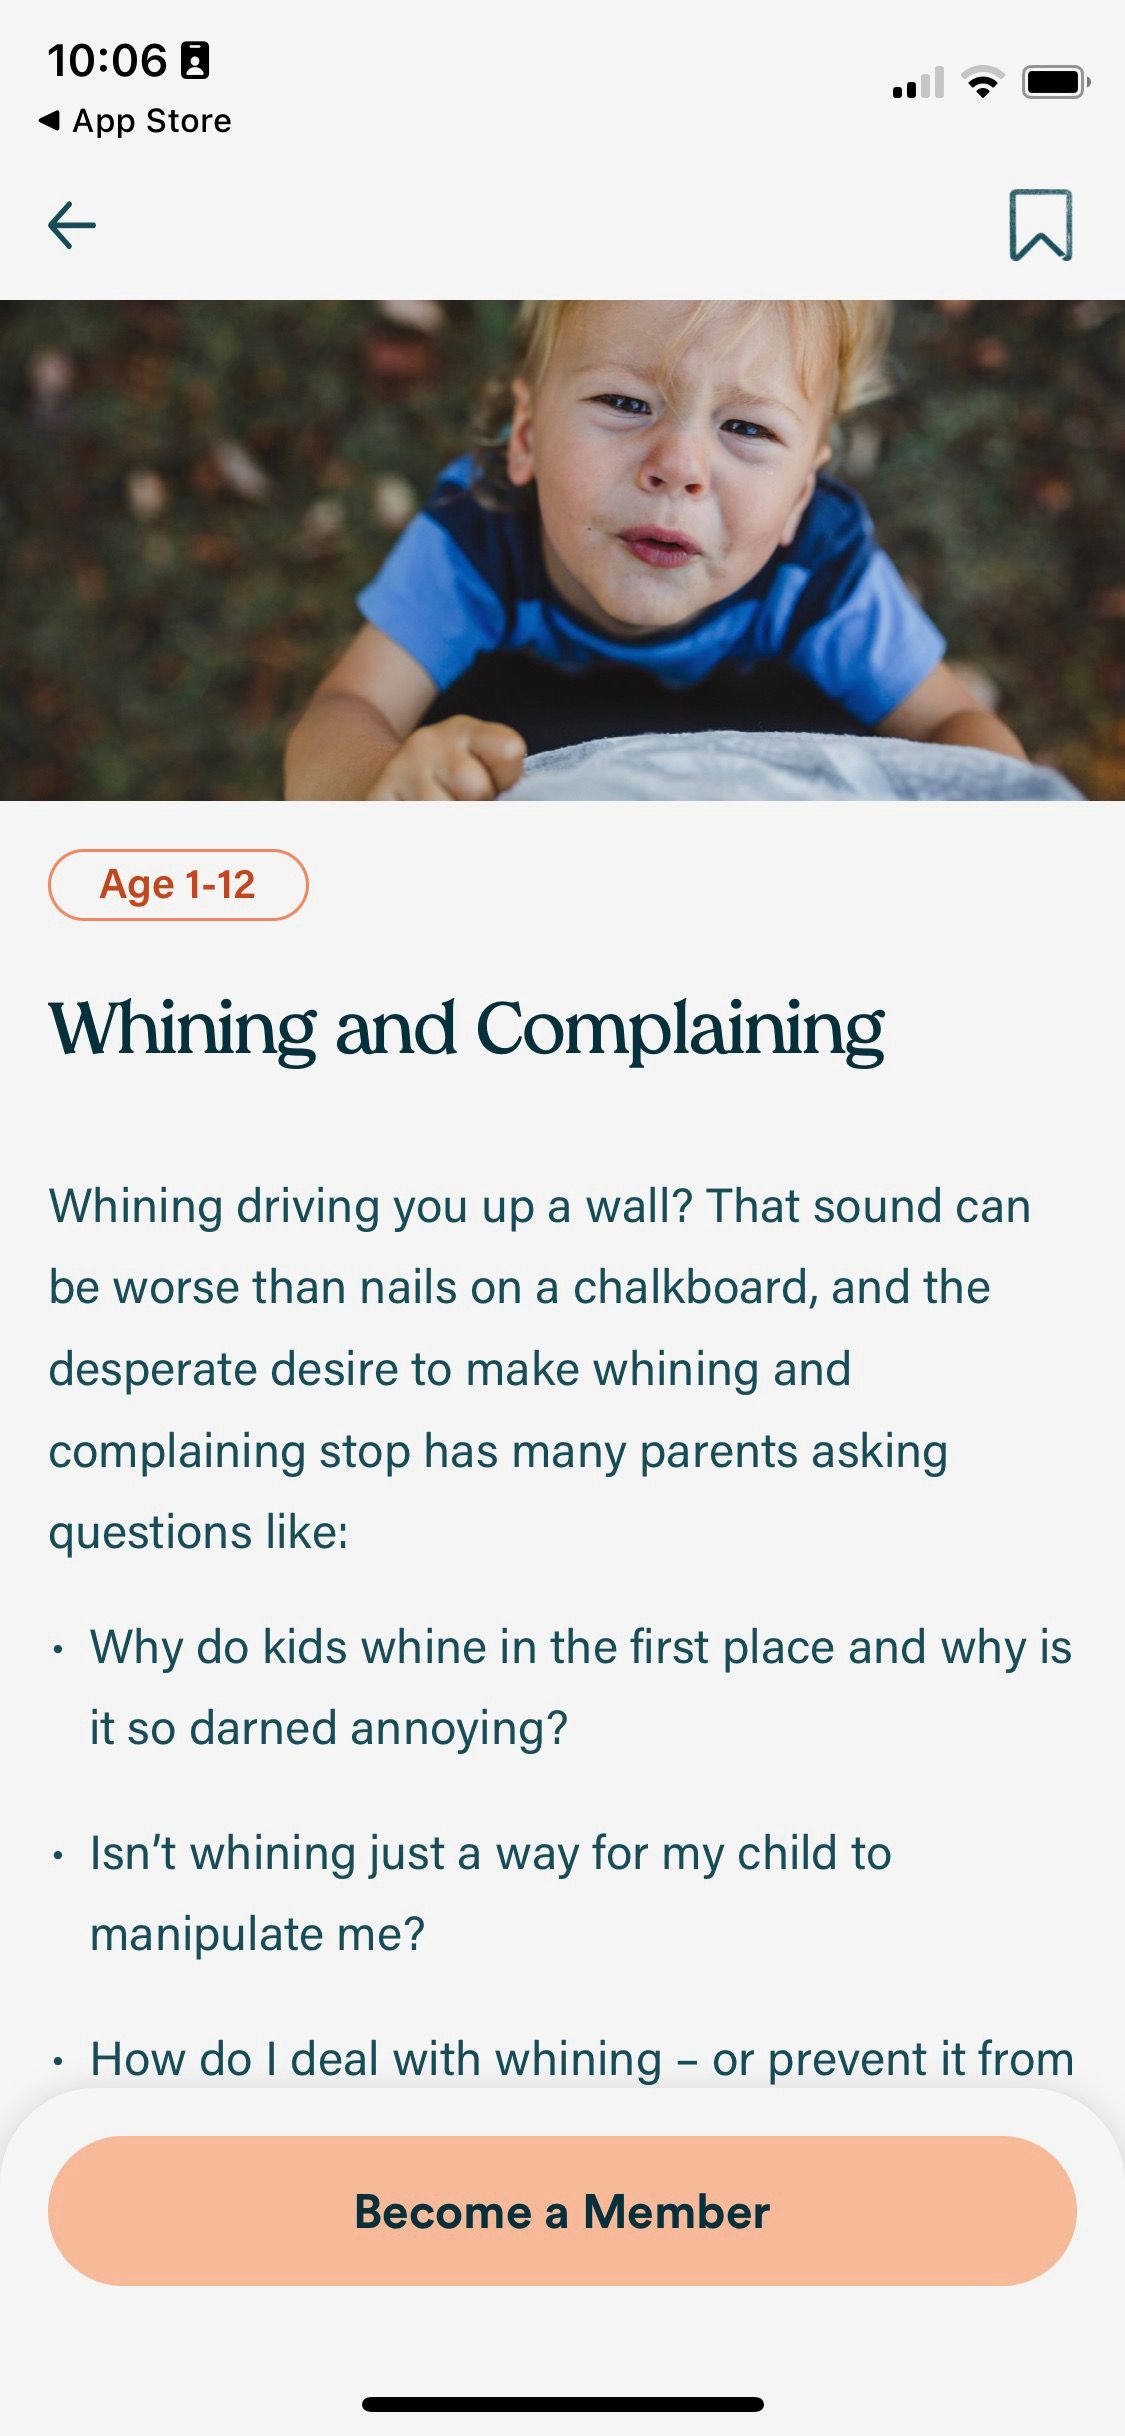 Screenshot of Parent Lab app showing Whining and Complaining help section